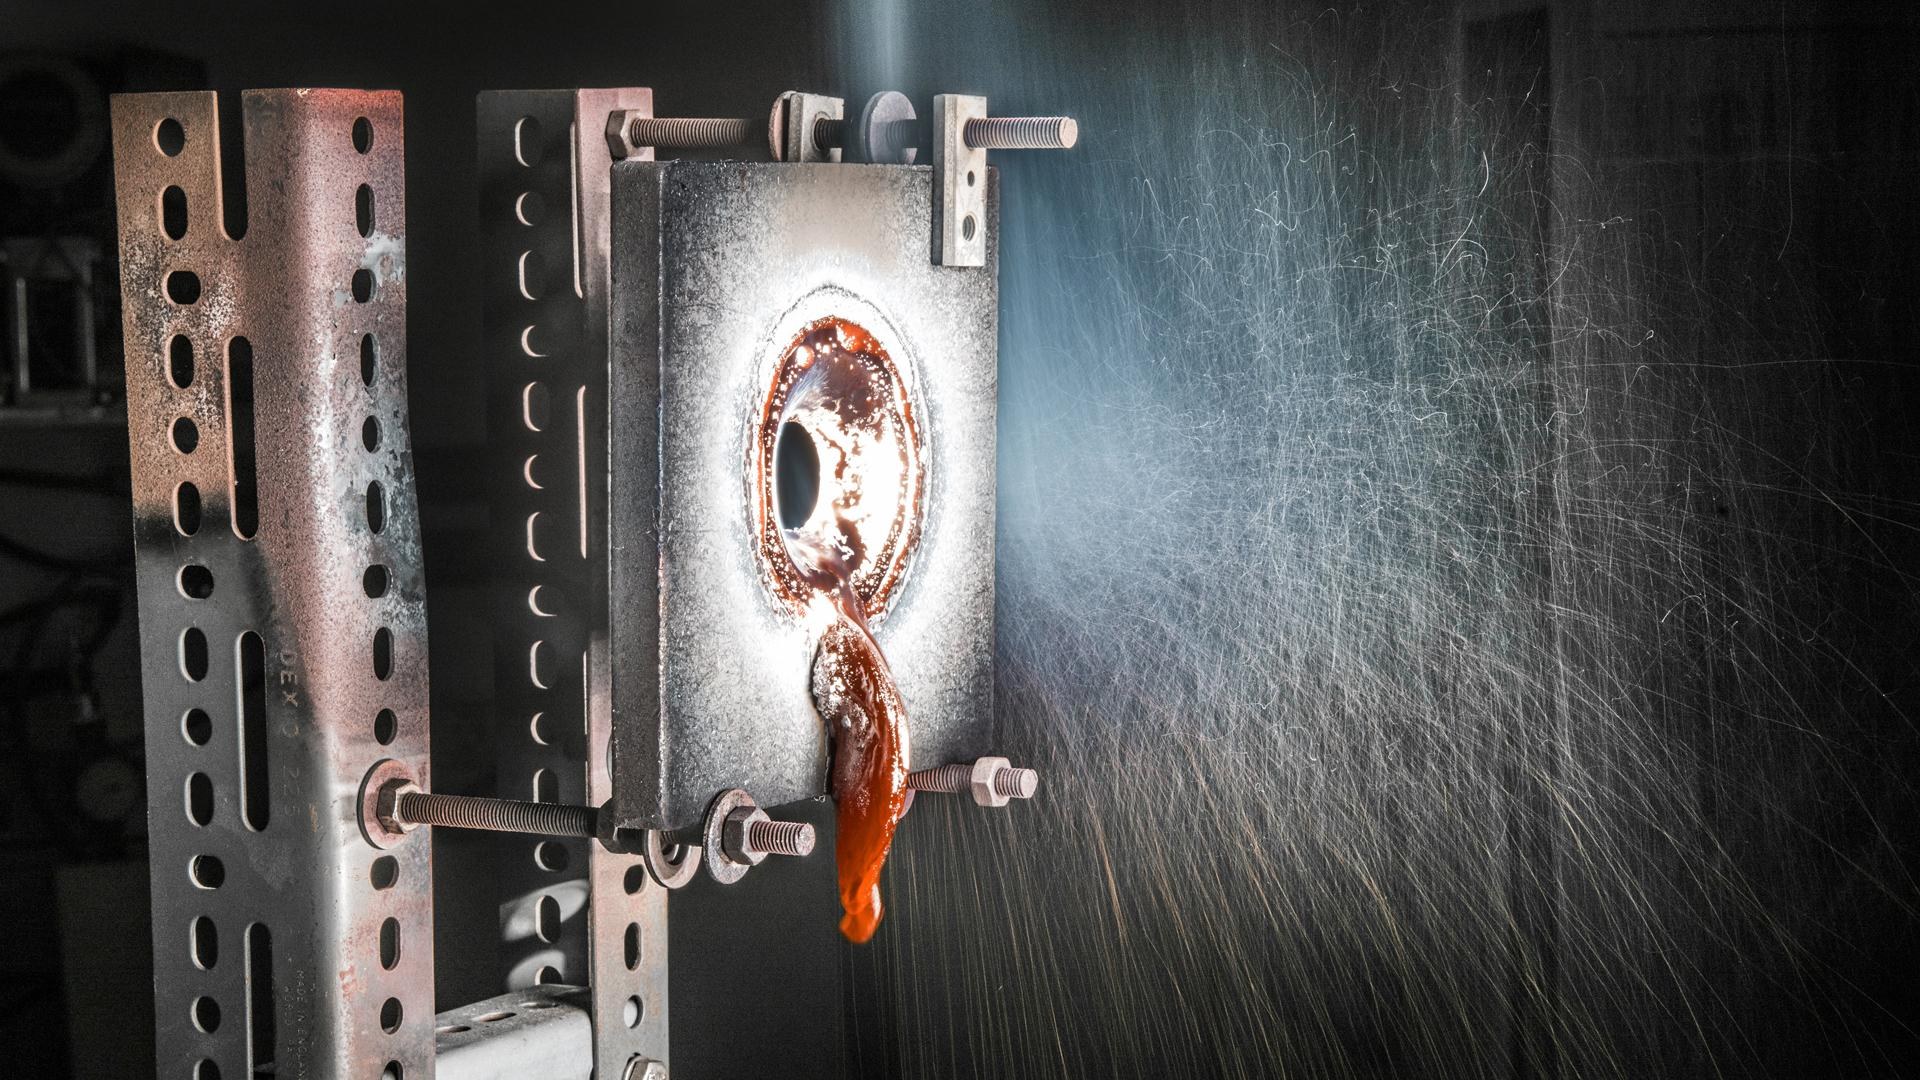 This experiment in the solar furnace demonstrates the energy contained in sunlight